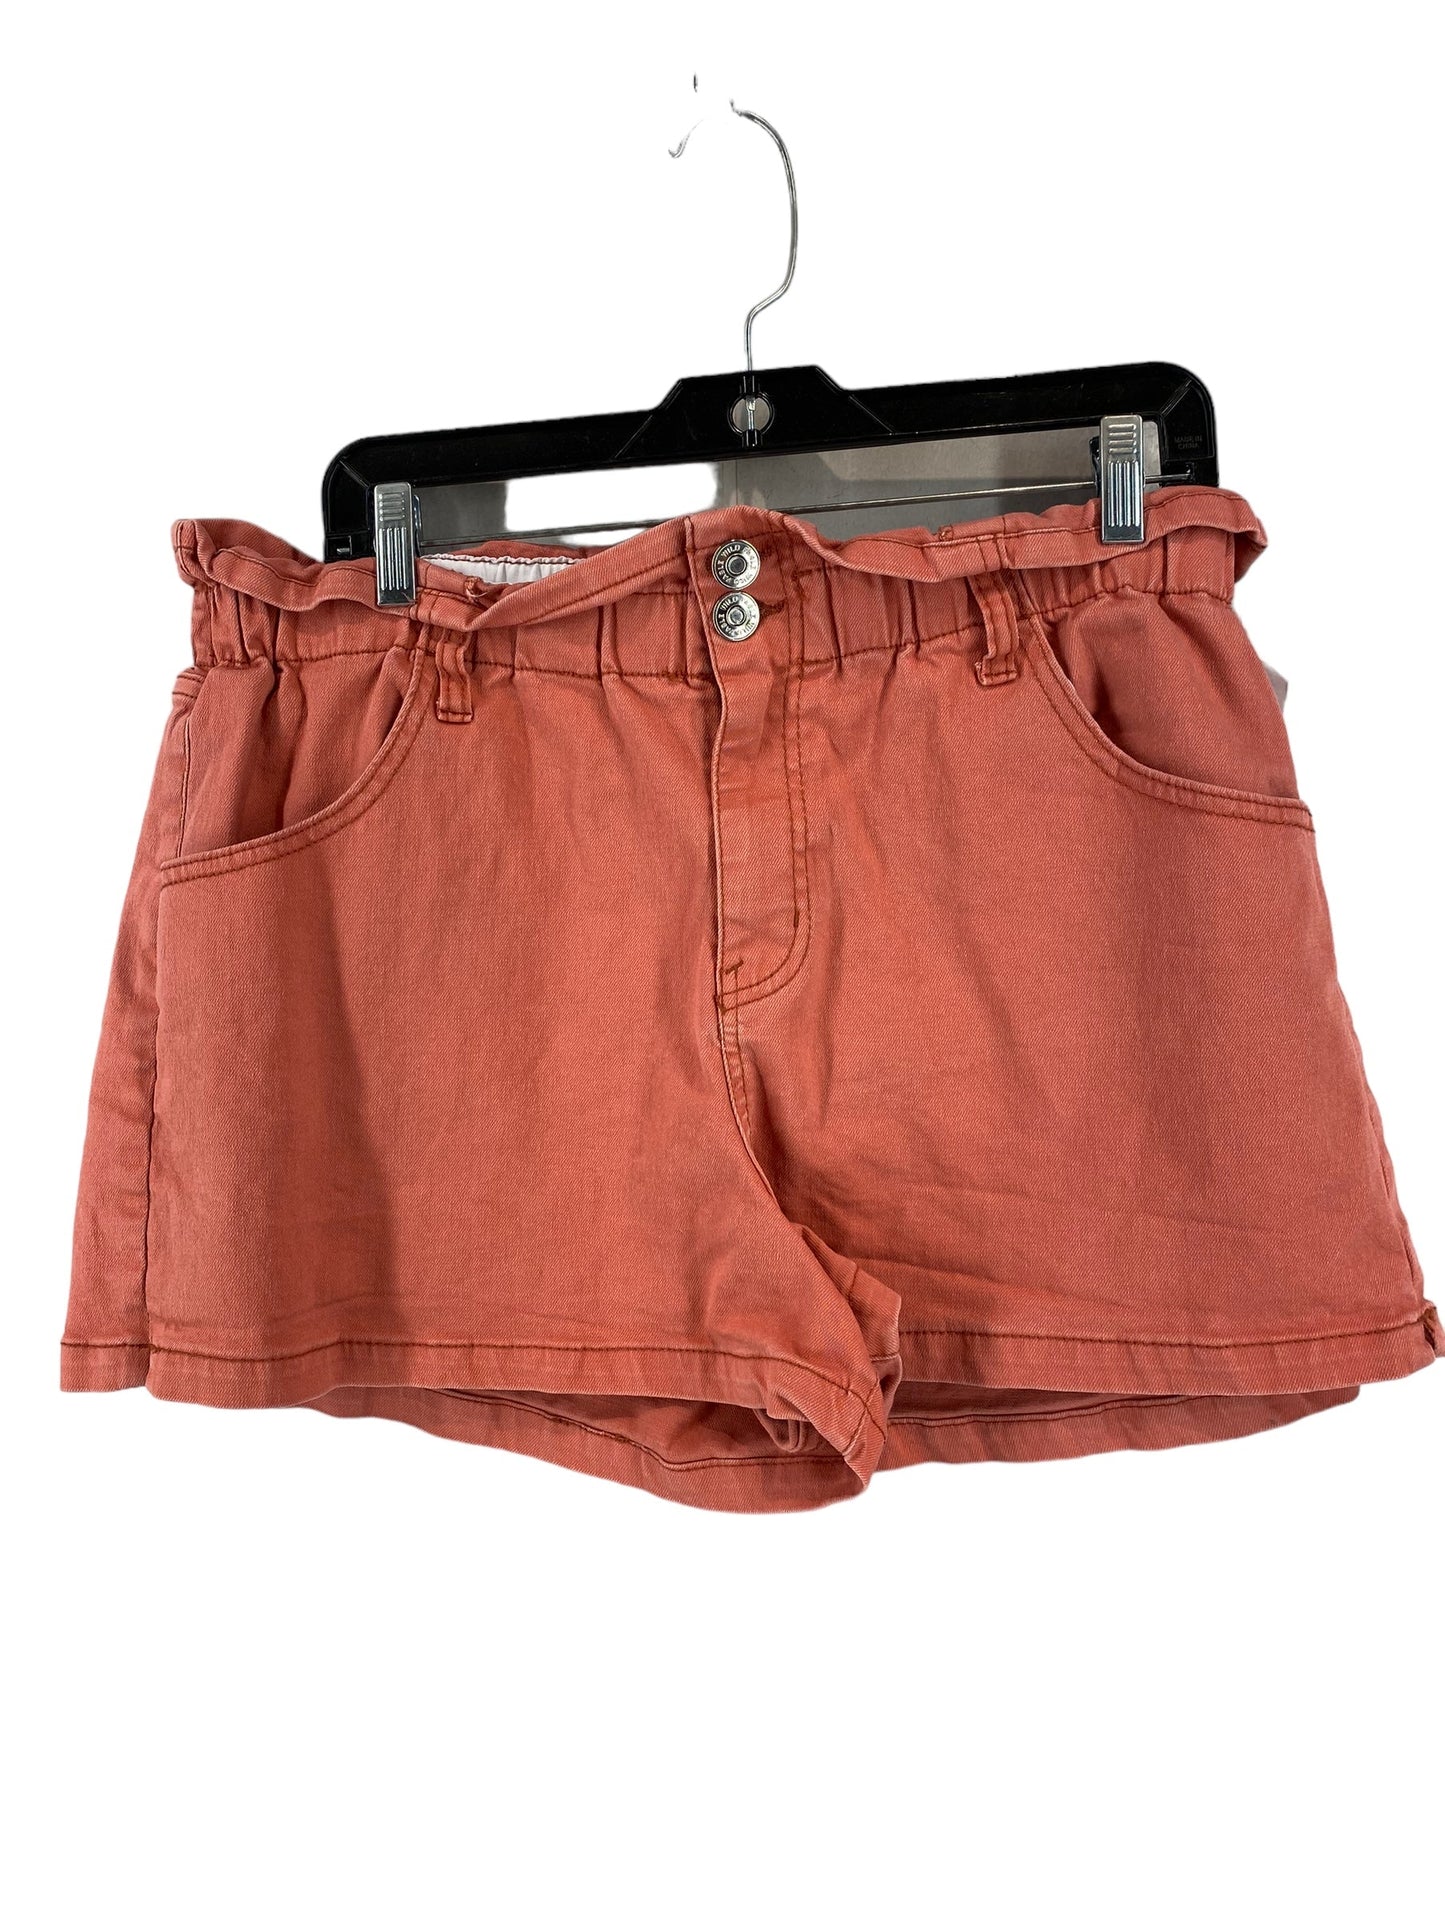 Shorts By Wild Fable  Size: Xl